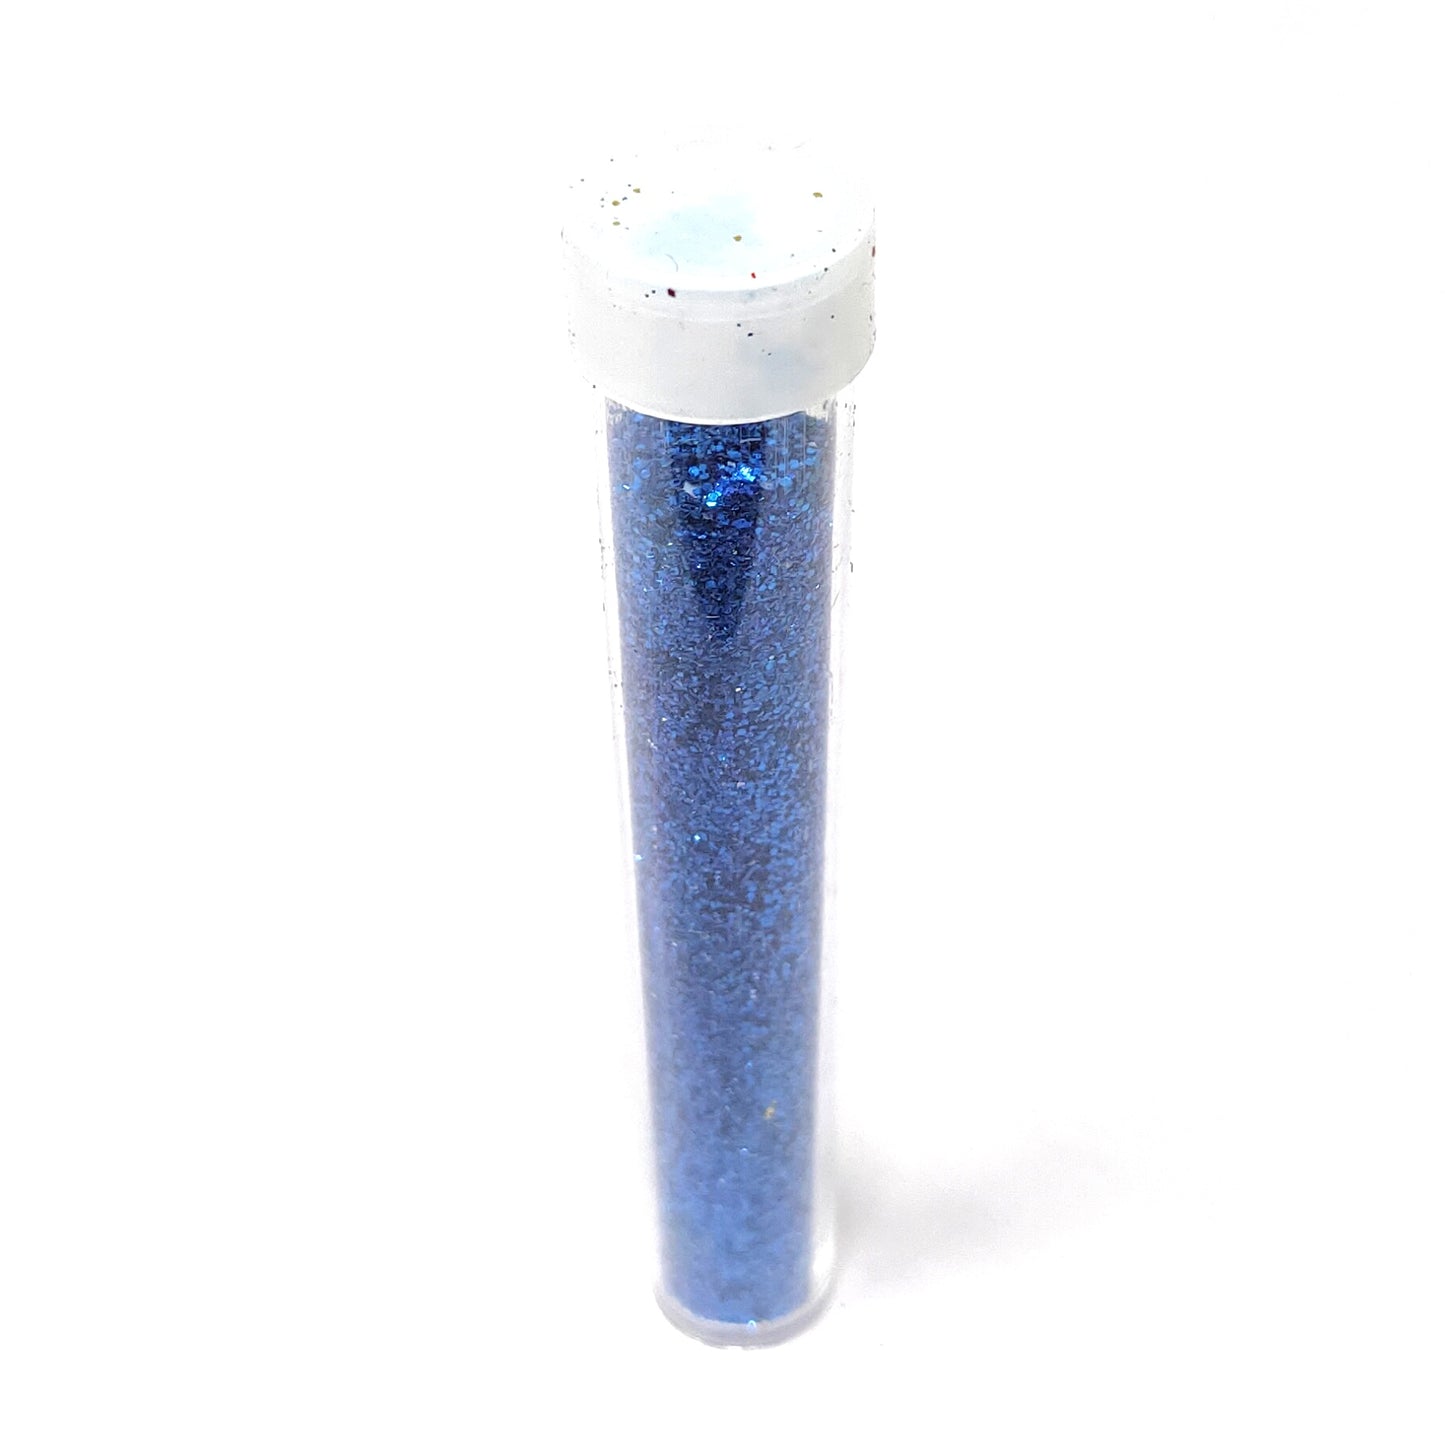 5 gram Blue Glitter for Arts and Crafts, Scrapbooking, Paper Decorations and Other Activities (001)